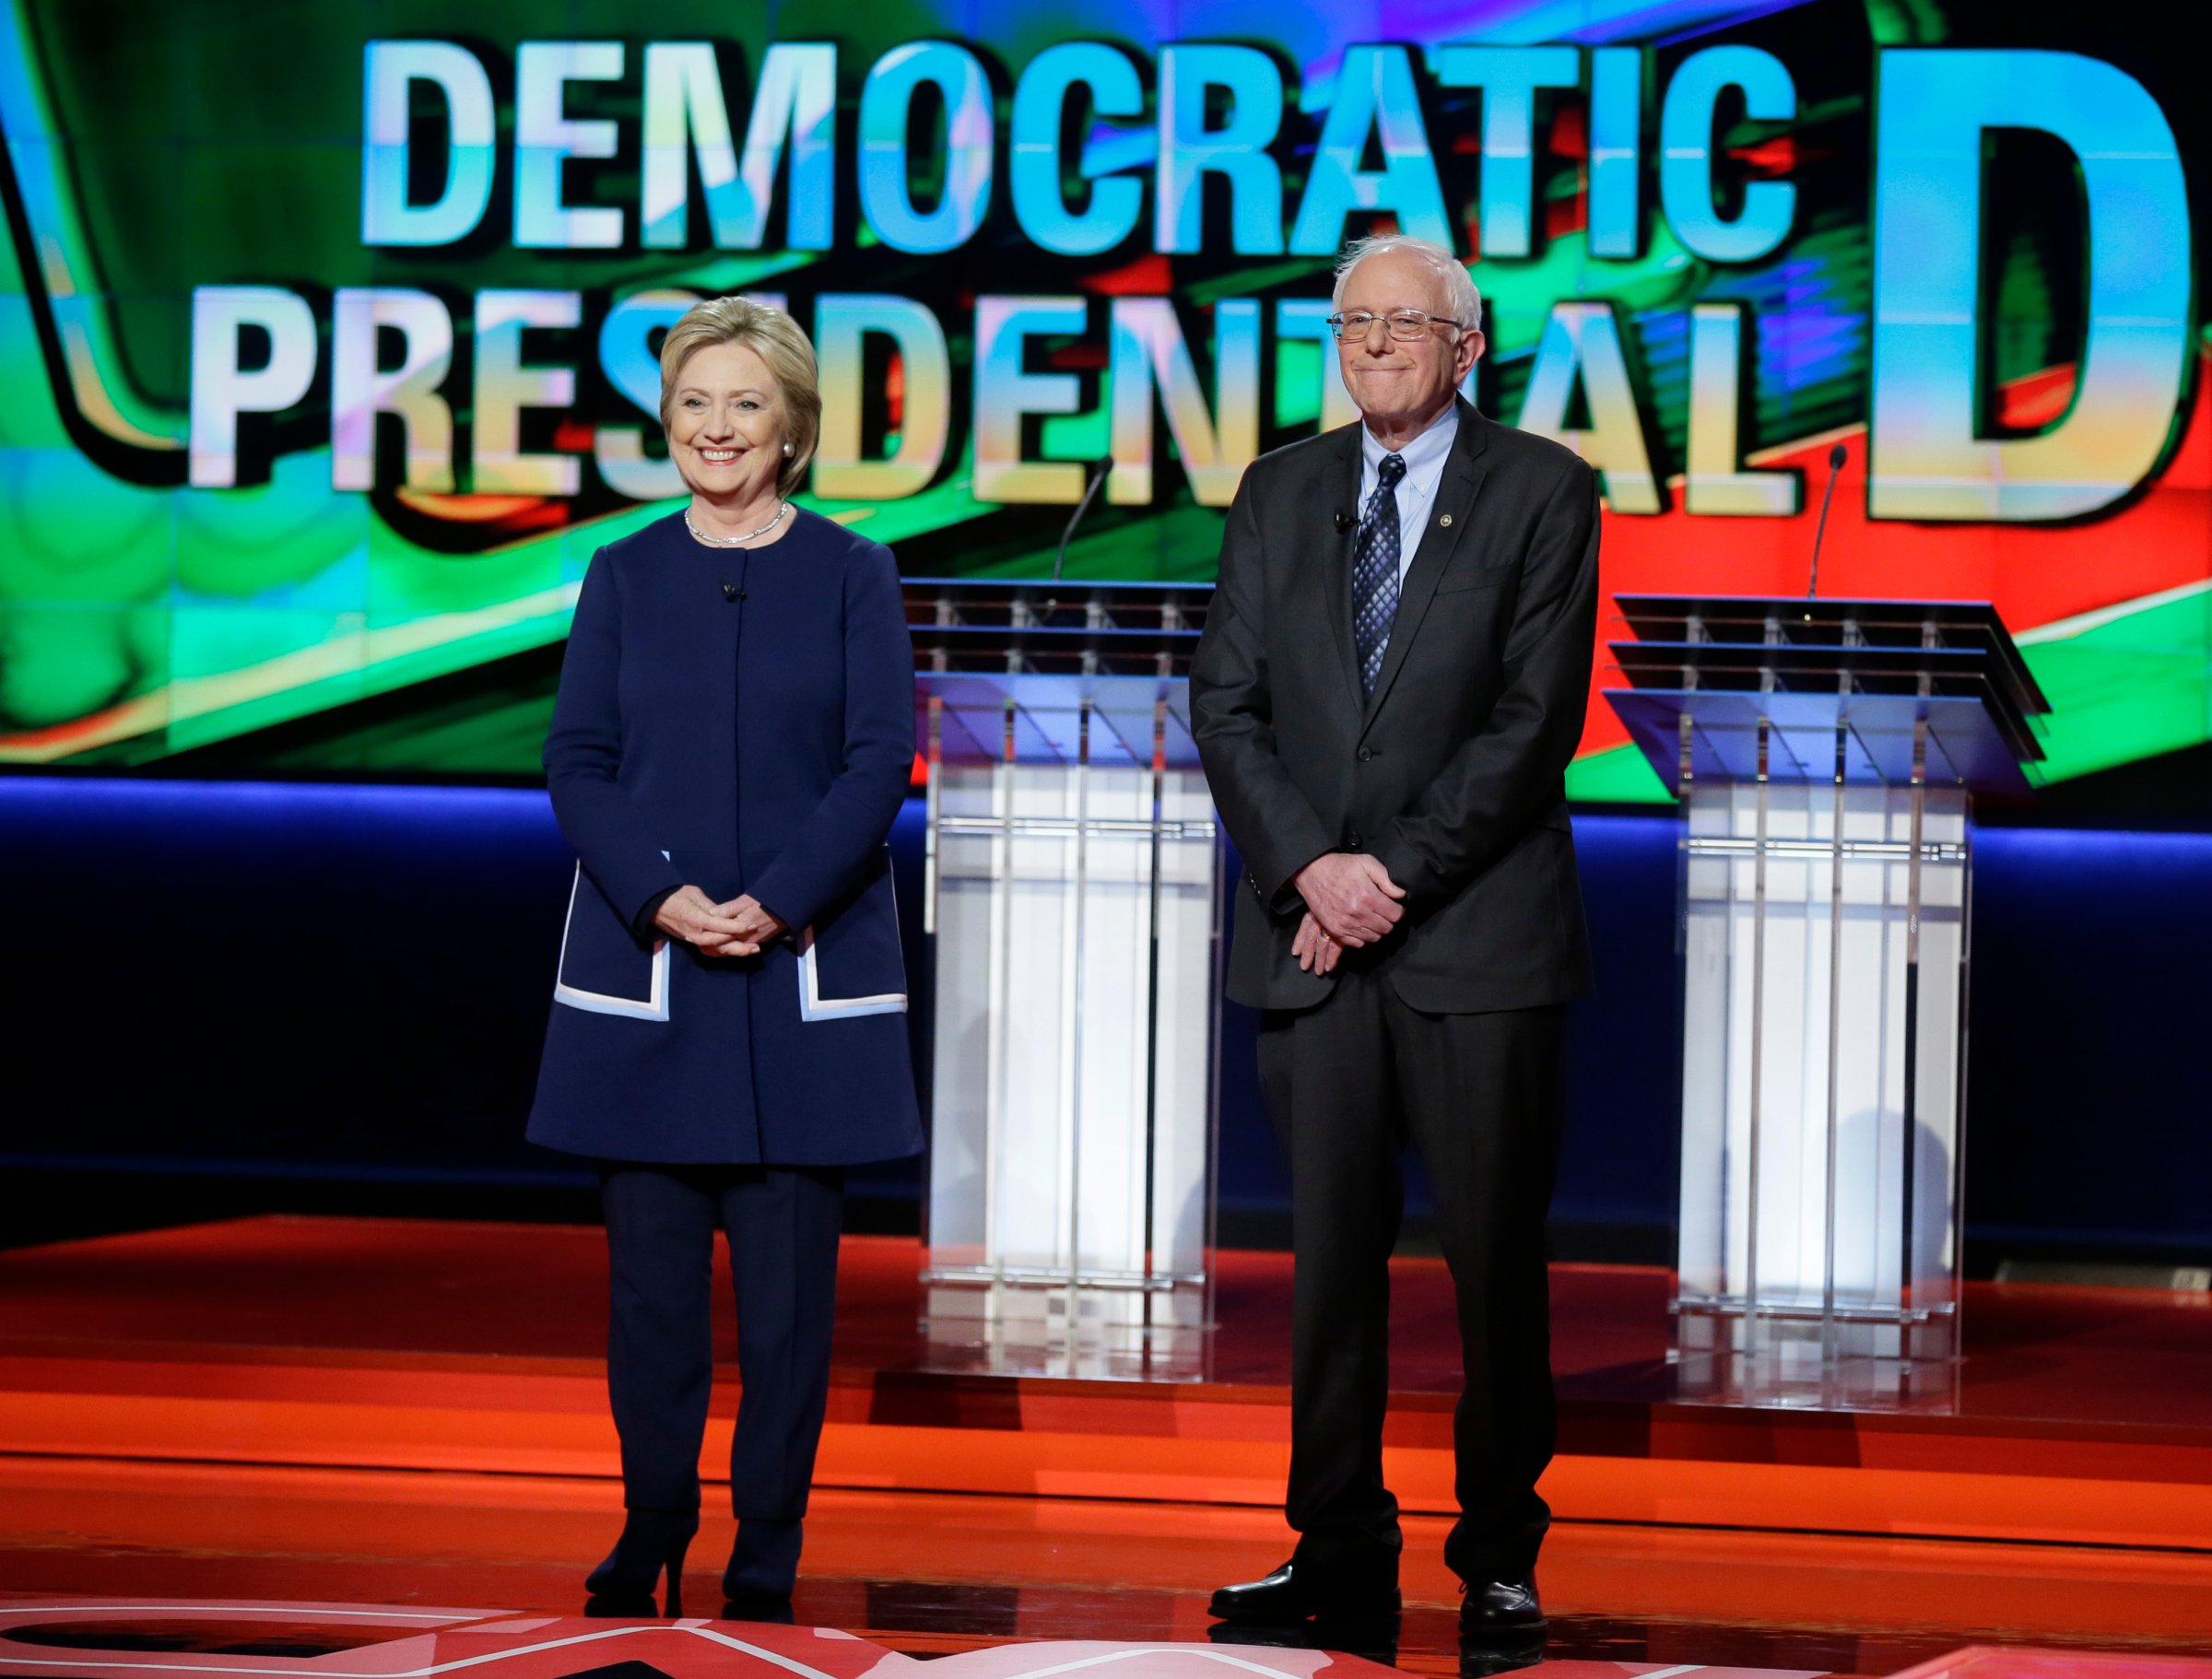 Hillary Clinton and Bernie Sanders stand stage before a Democratic presidential primary debate at the University of Michigan-Flint in Flint, Mich. on March 6, 2016.